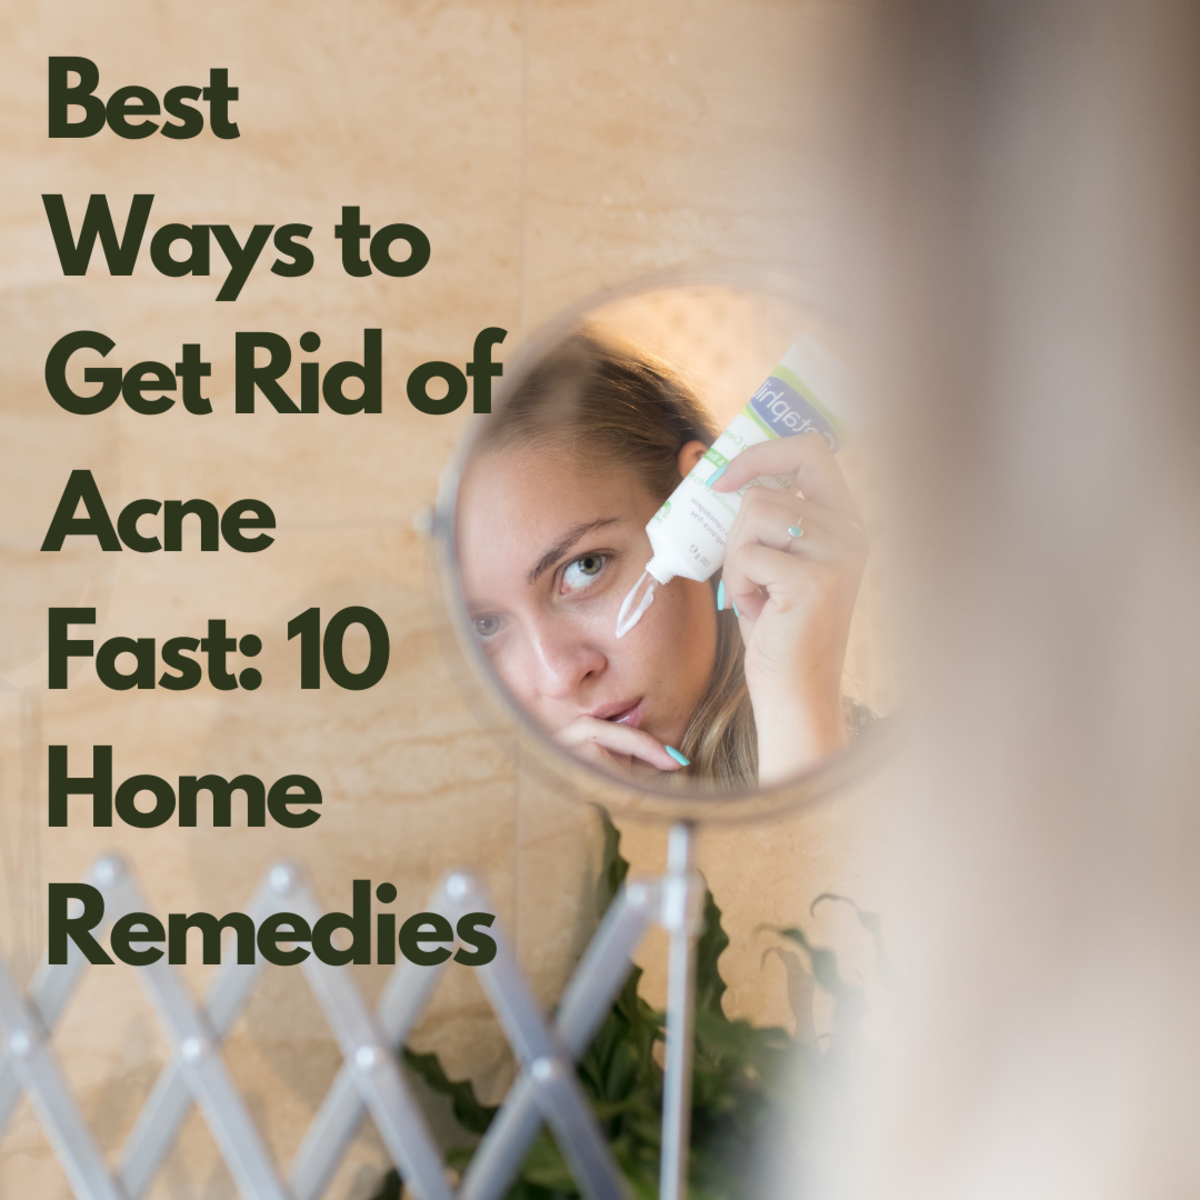 Best Ways to Get Rid of Acne Fast: 10 Home Remedies